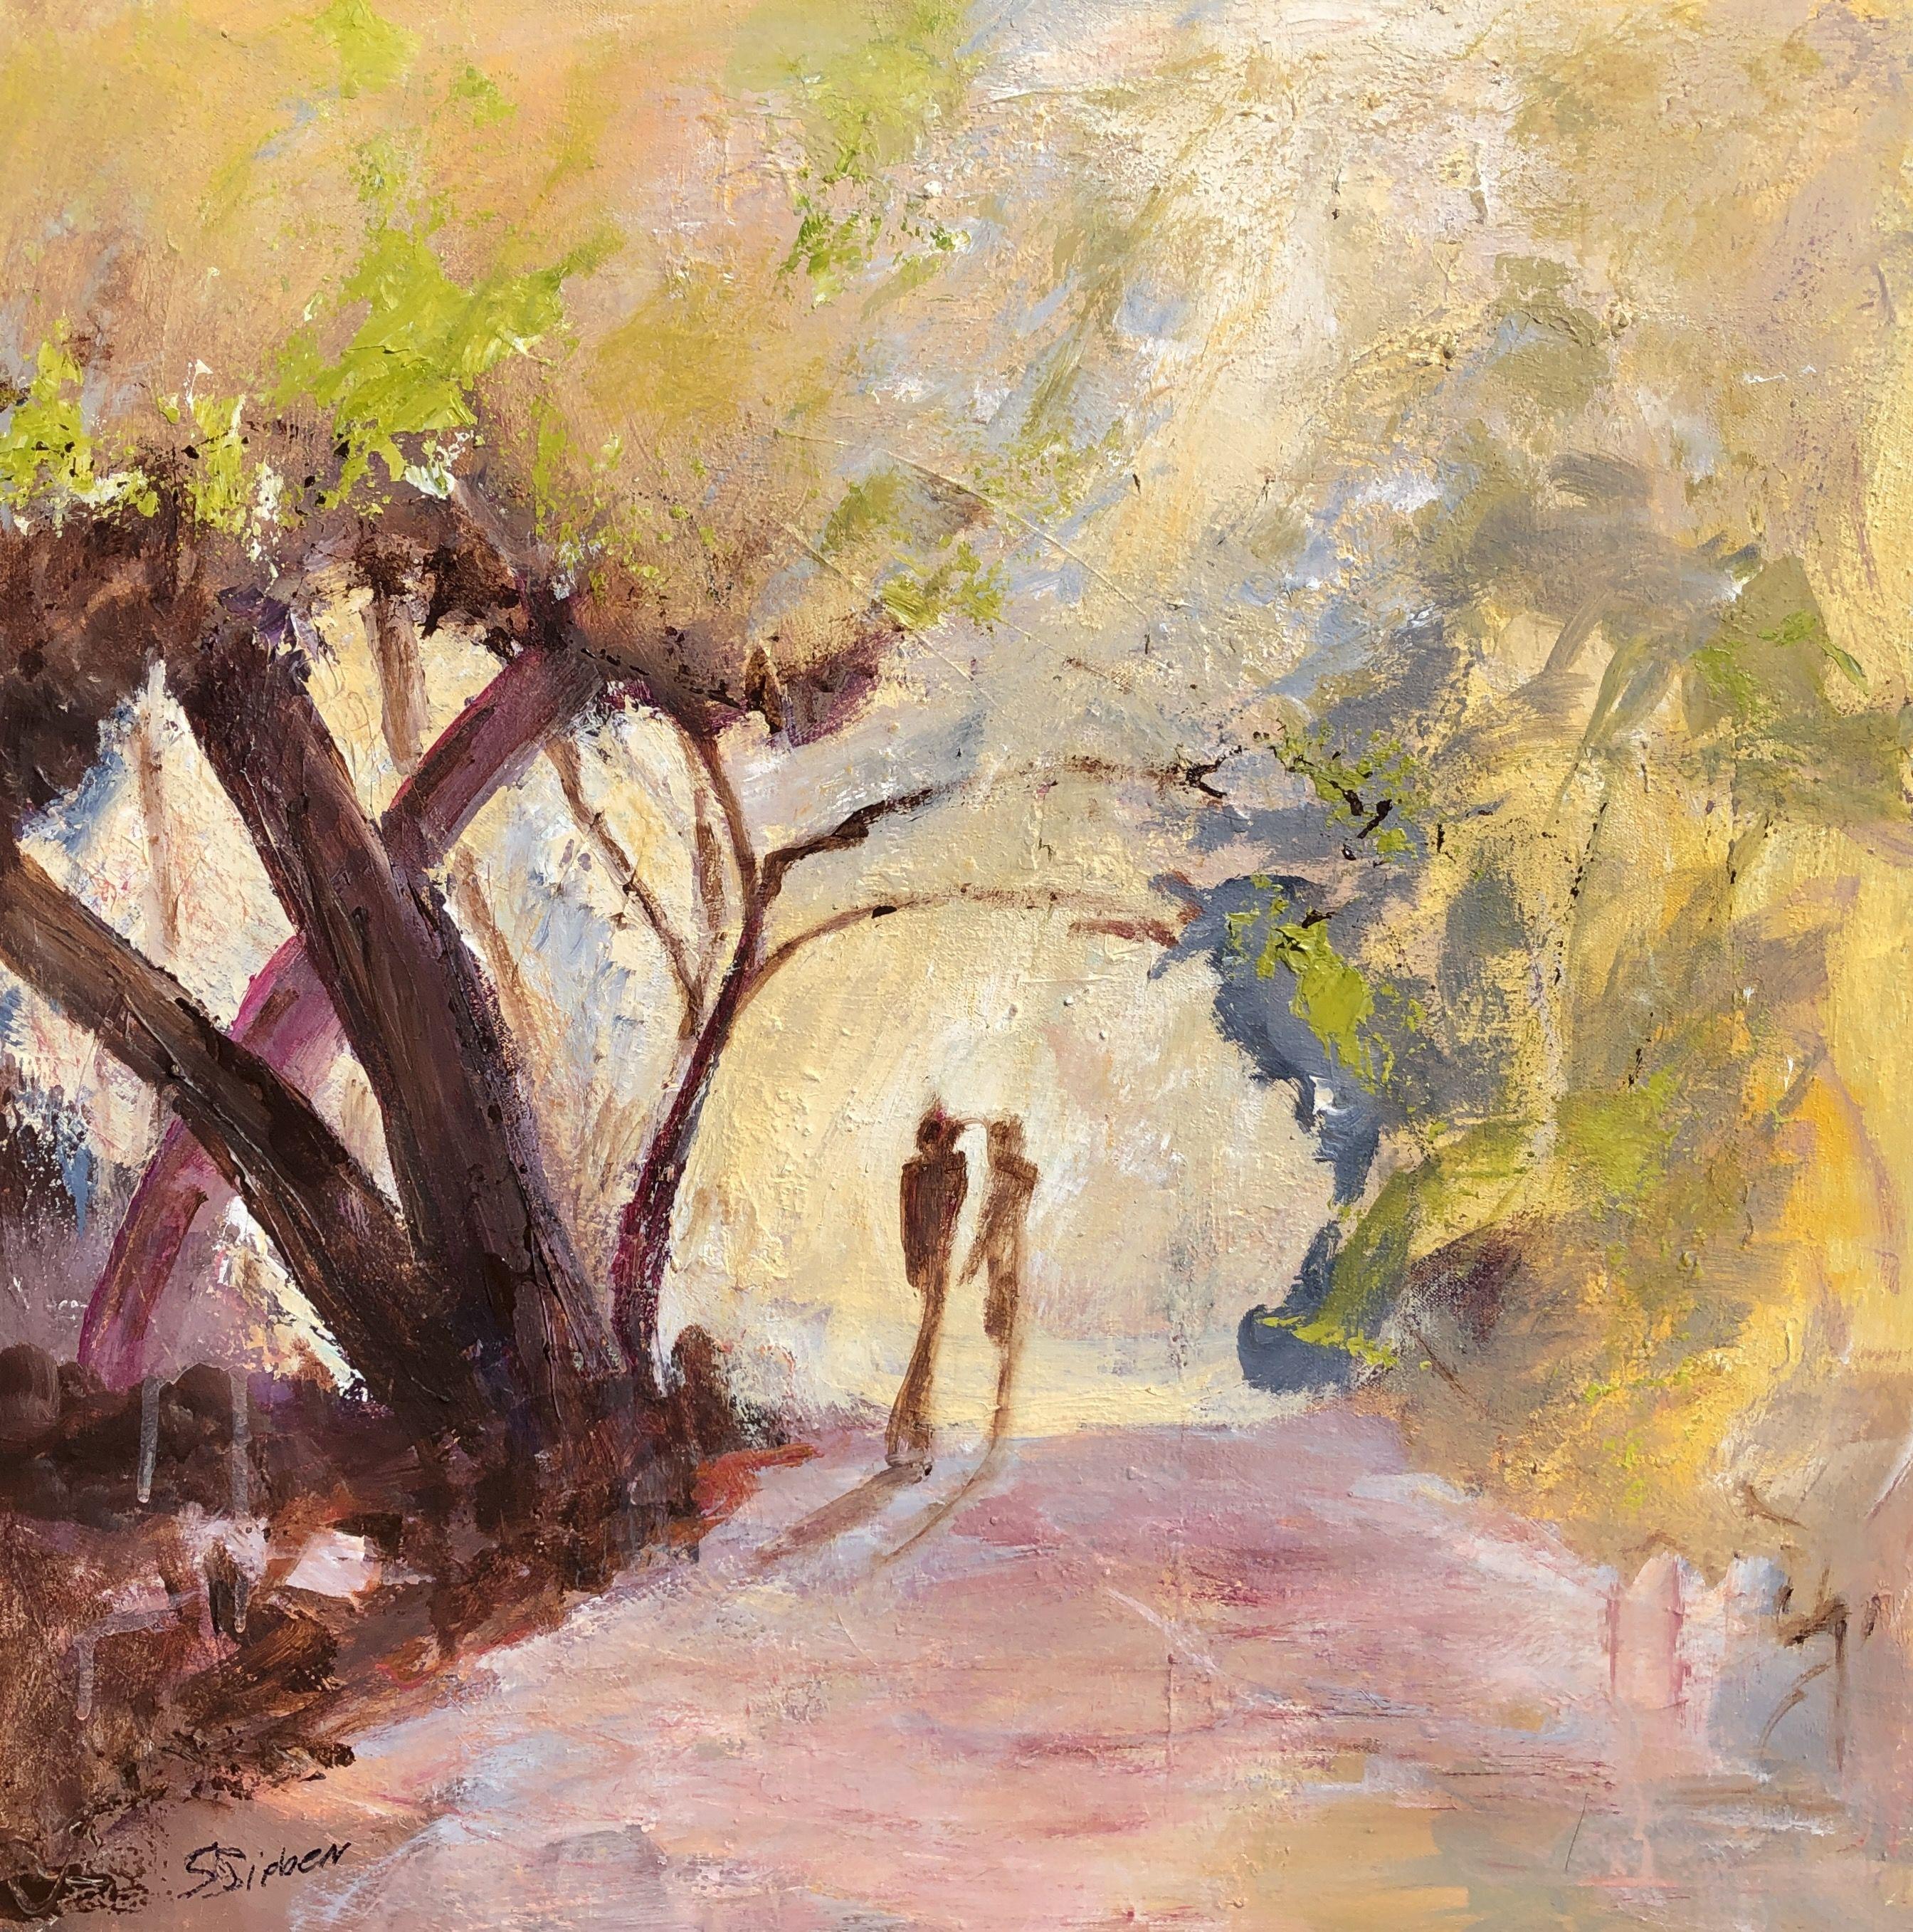 It almost seems like a walk into a bright new world on a trail that winds from a shady lane into the sunlit path beyond.  Painting  has been coated with a satin finish varnish on canvas with the sides painted.  It is wired on the back and arrives